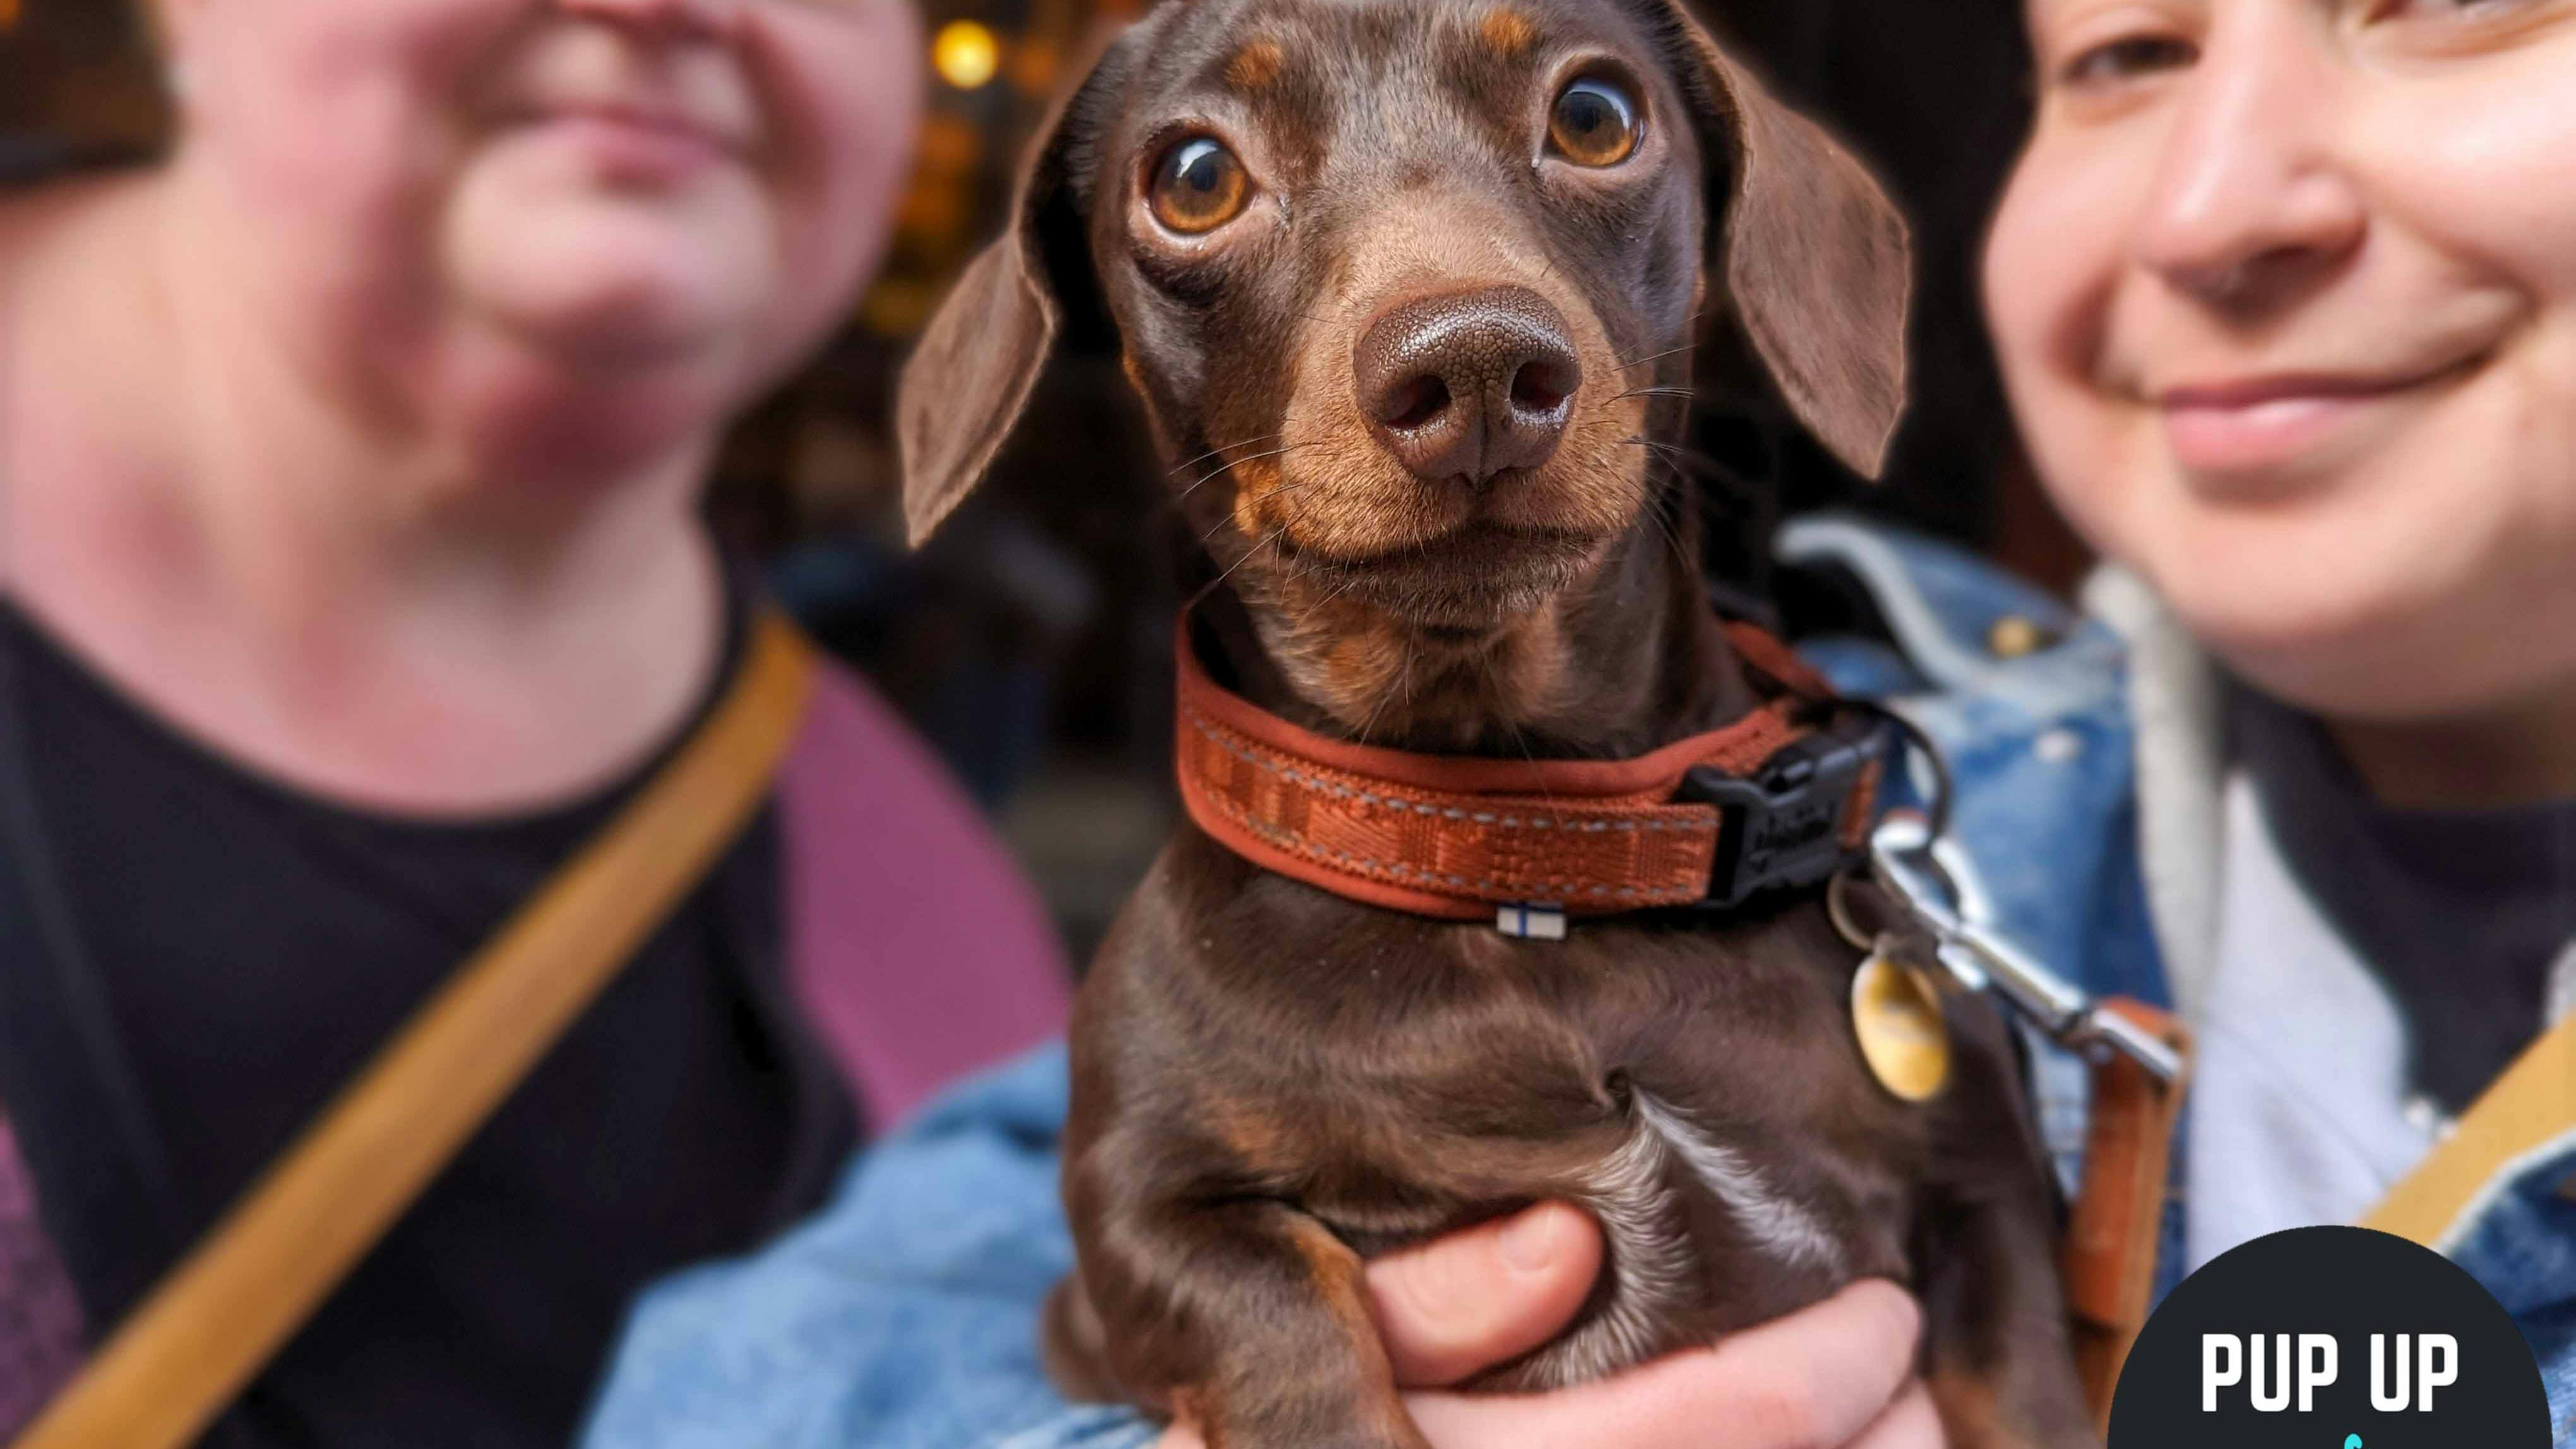 A pop-up sausage dog café is coming to Cardiff